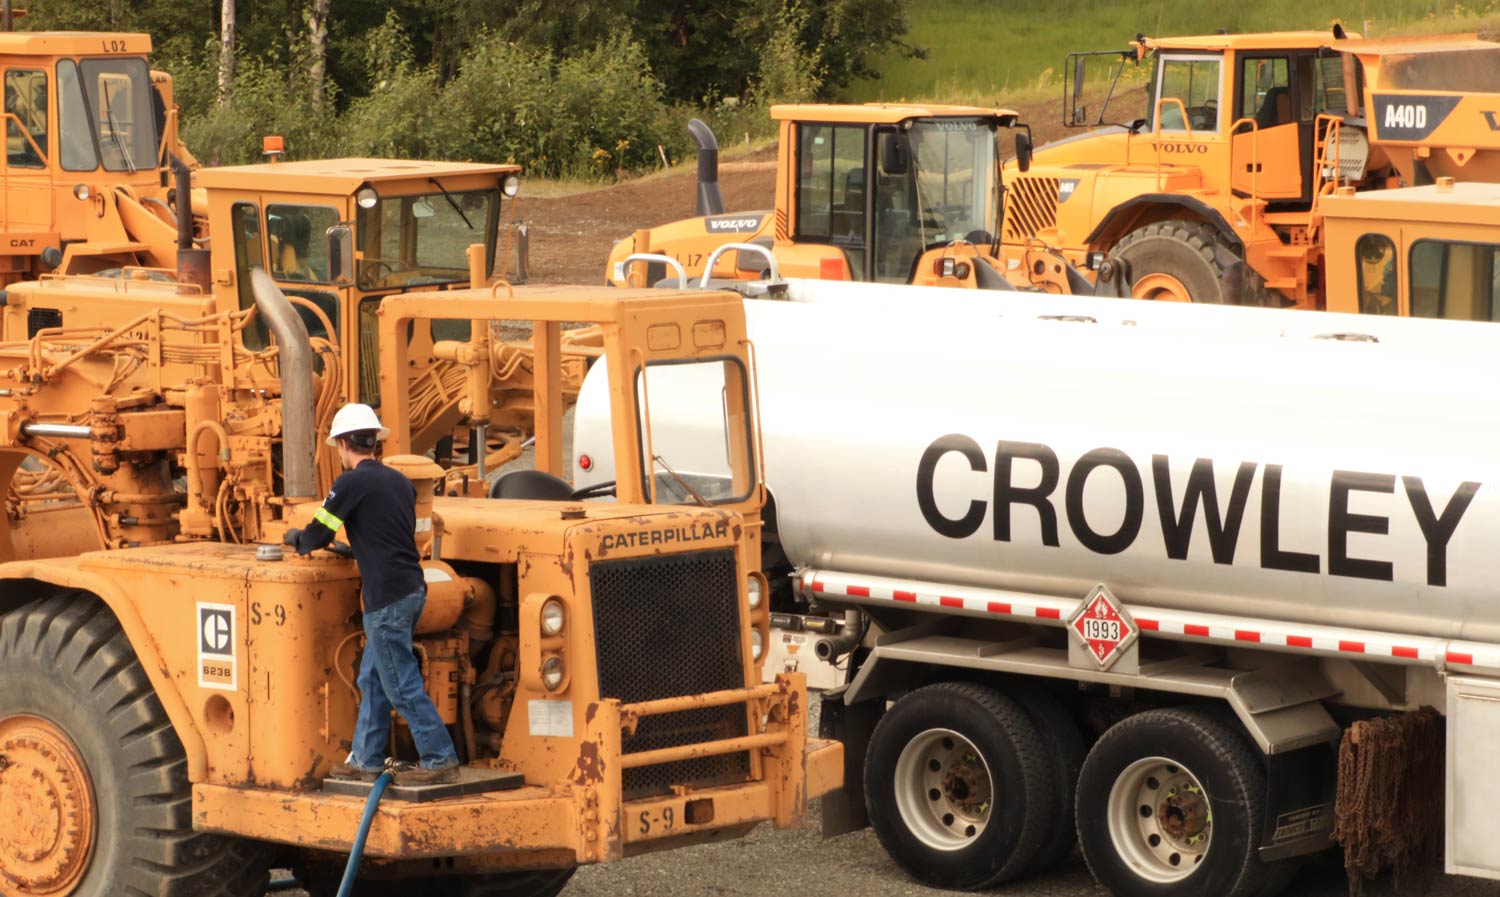 Crowley gasoline truck at a construction site